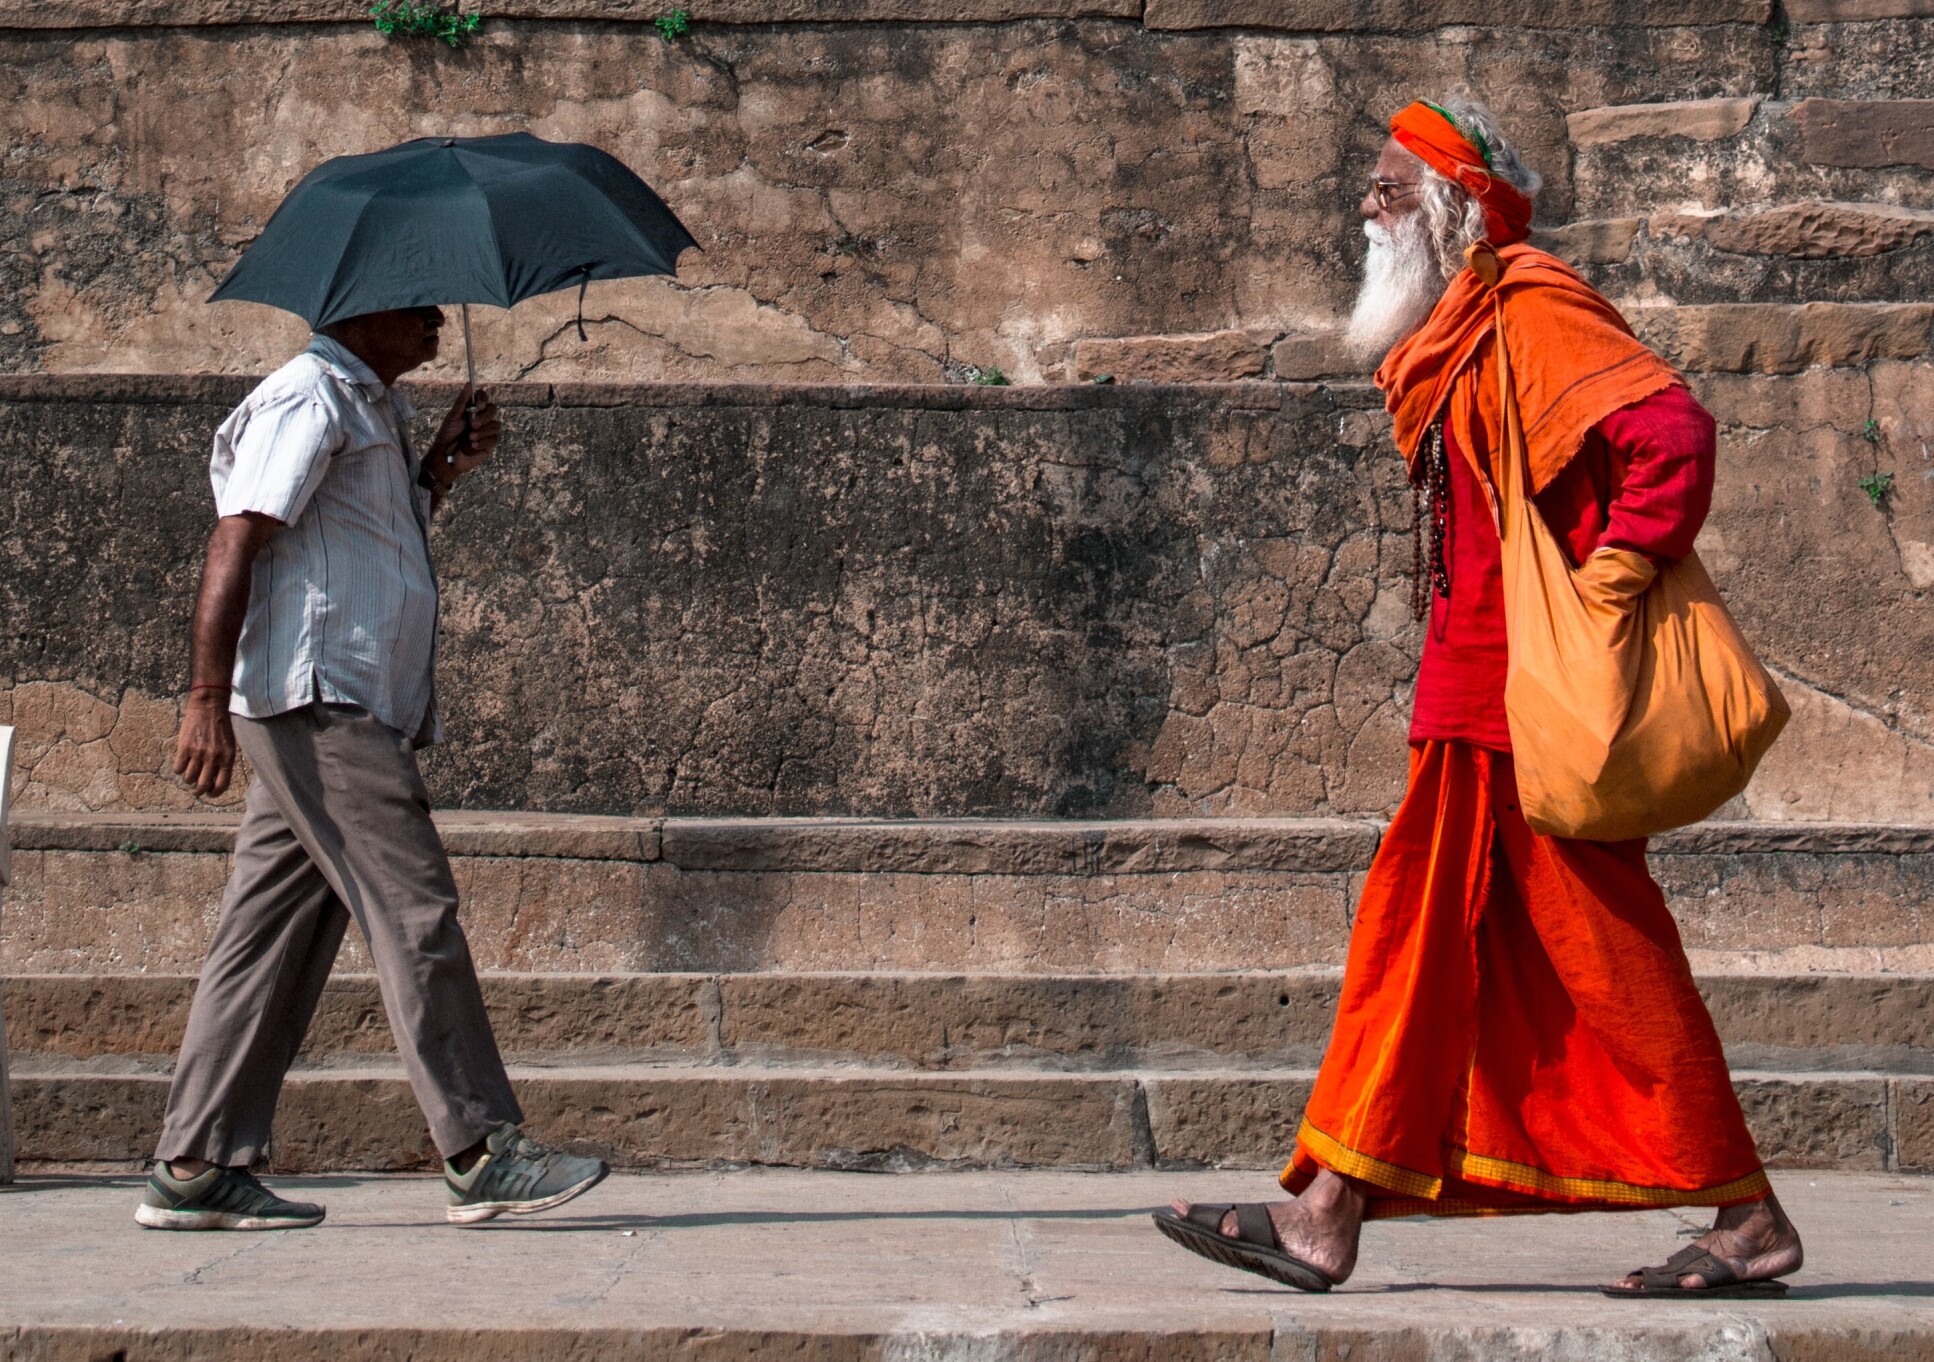 Two Indian people walk past each other on hot day, one wearing a shirt and pants with an umbrella and the other wearing orange robes.